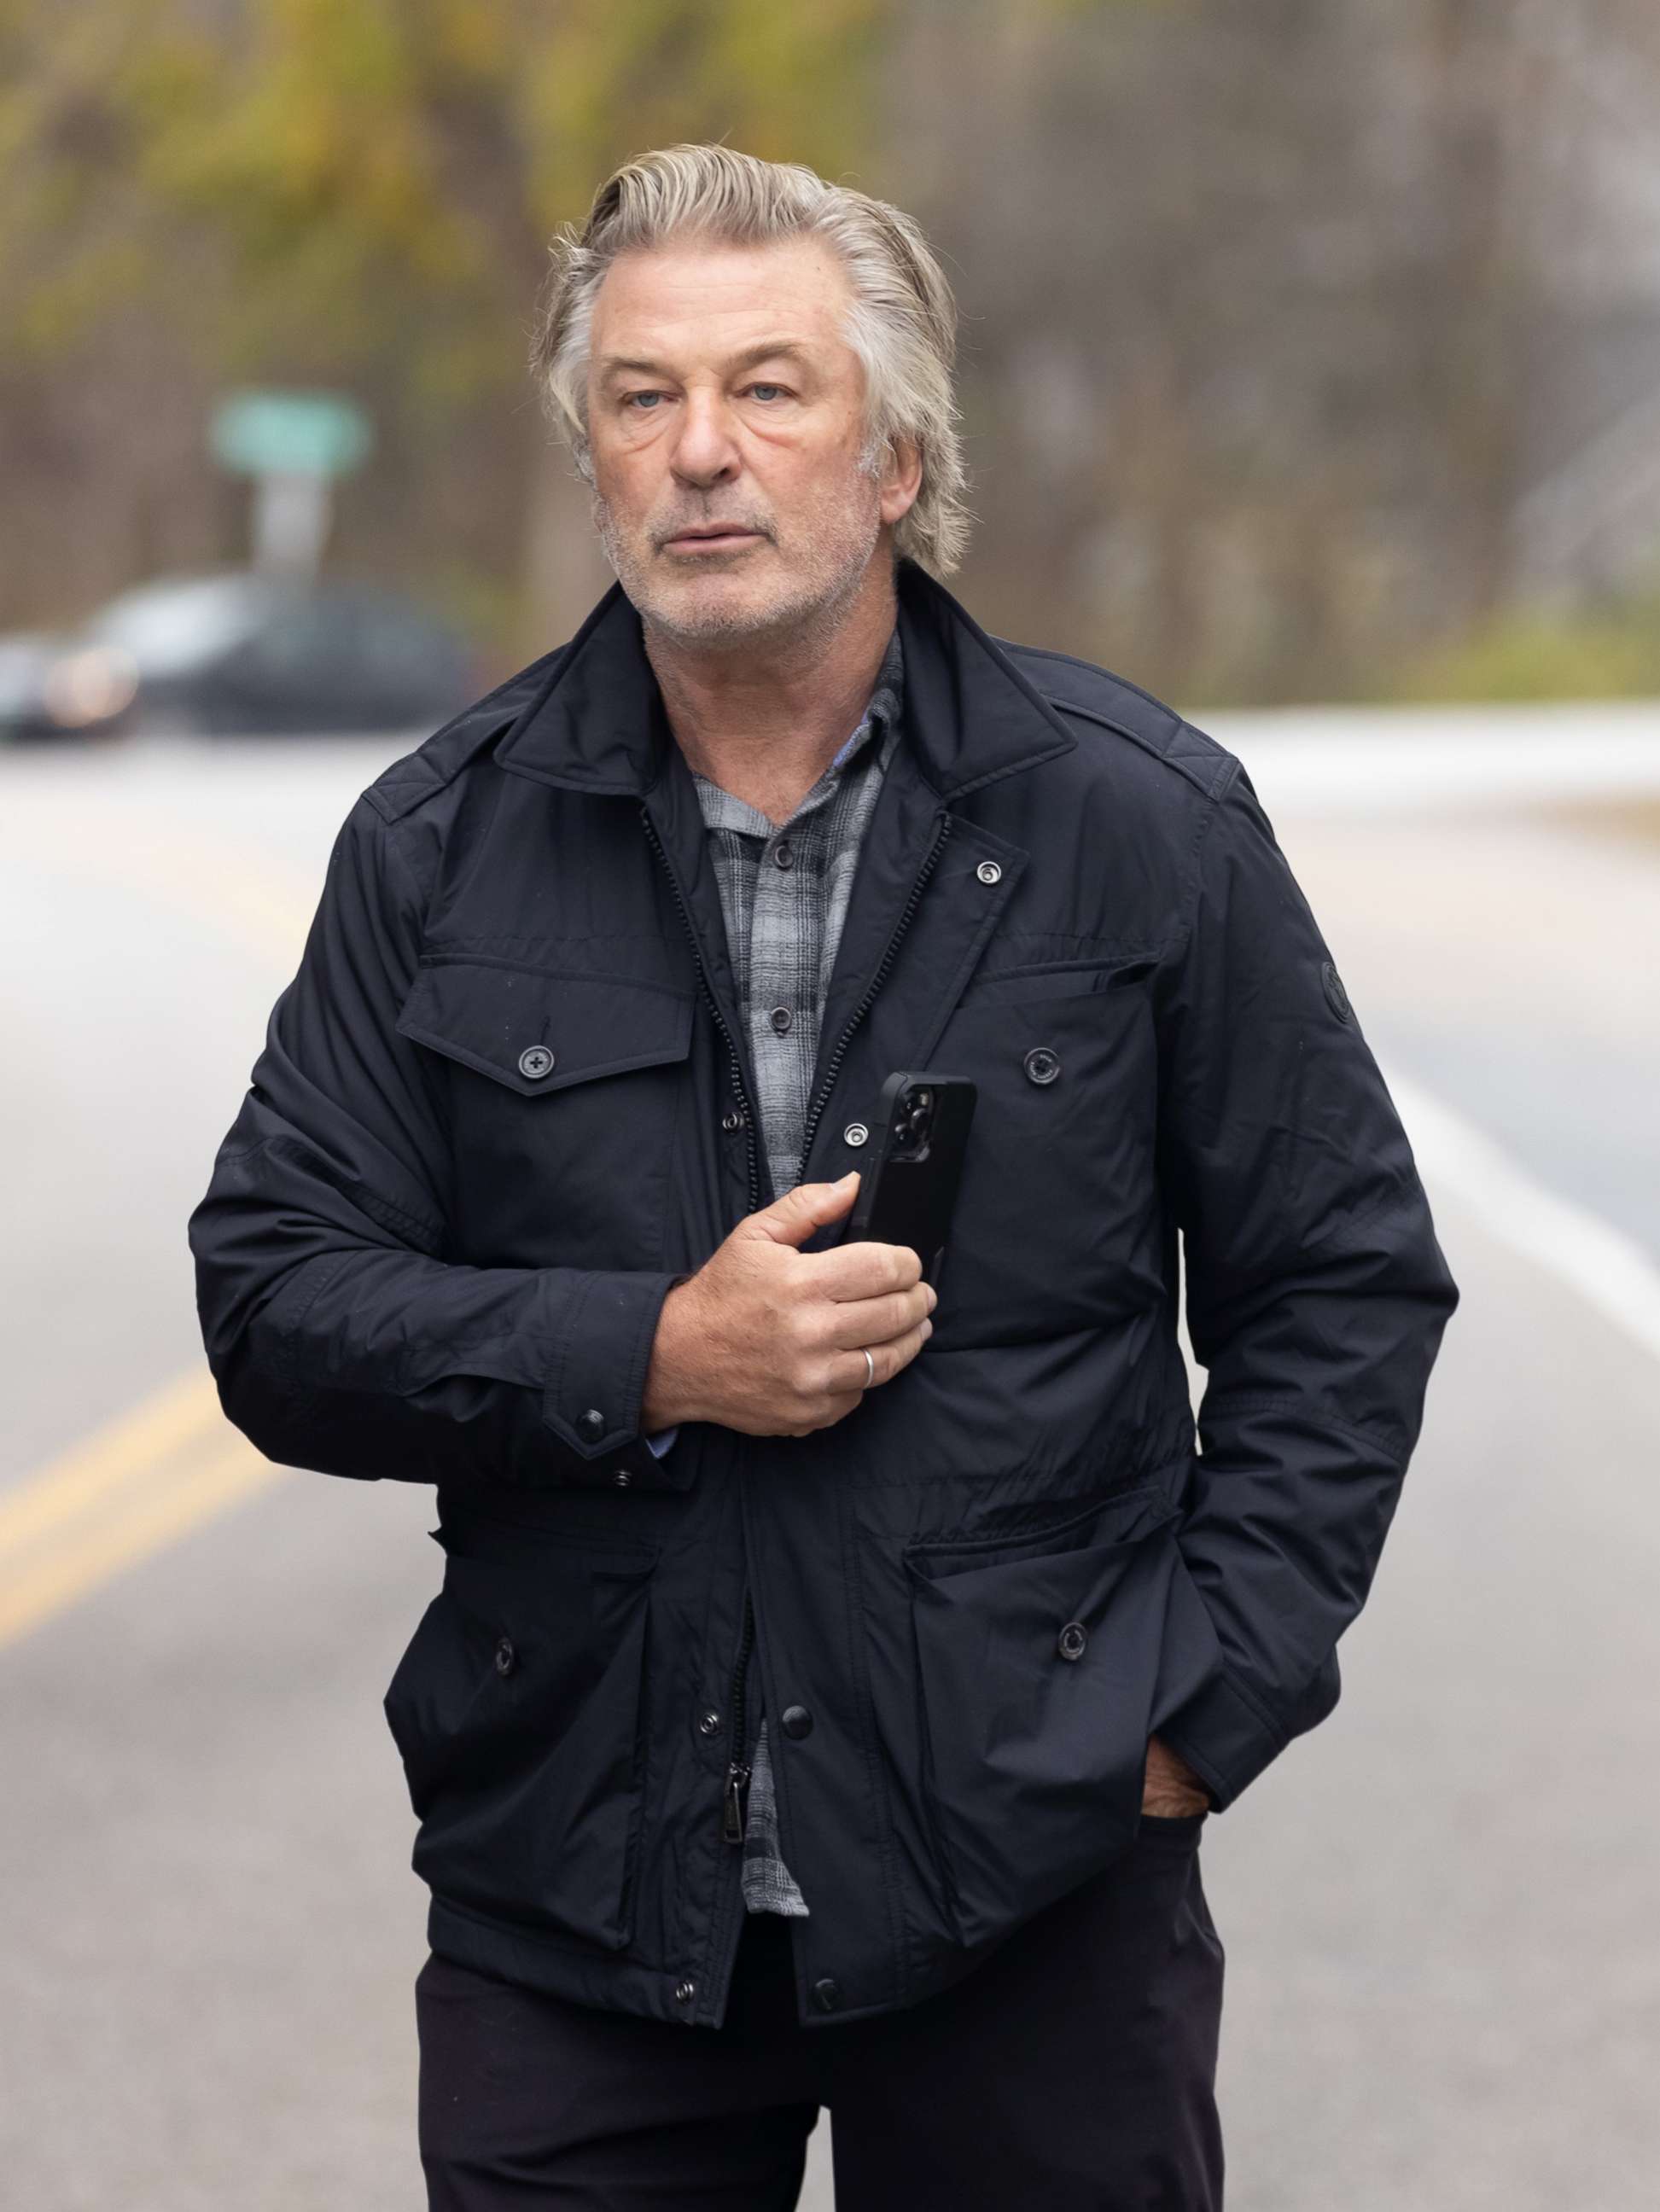 PHOTO: Alec Baldwin speaks regarding the accidental shooting that killed cinematographer Halyna Hutchins, and wounded director Joel Souza on the set of the film "Rust", in Manchester, Vt., Oct. 30, 2021.